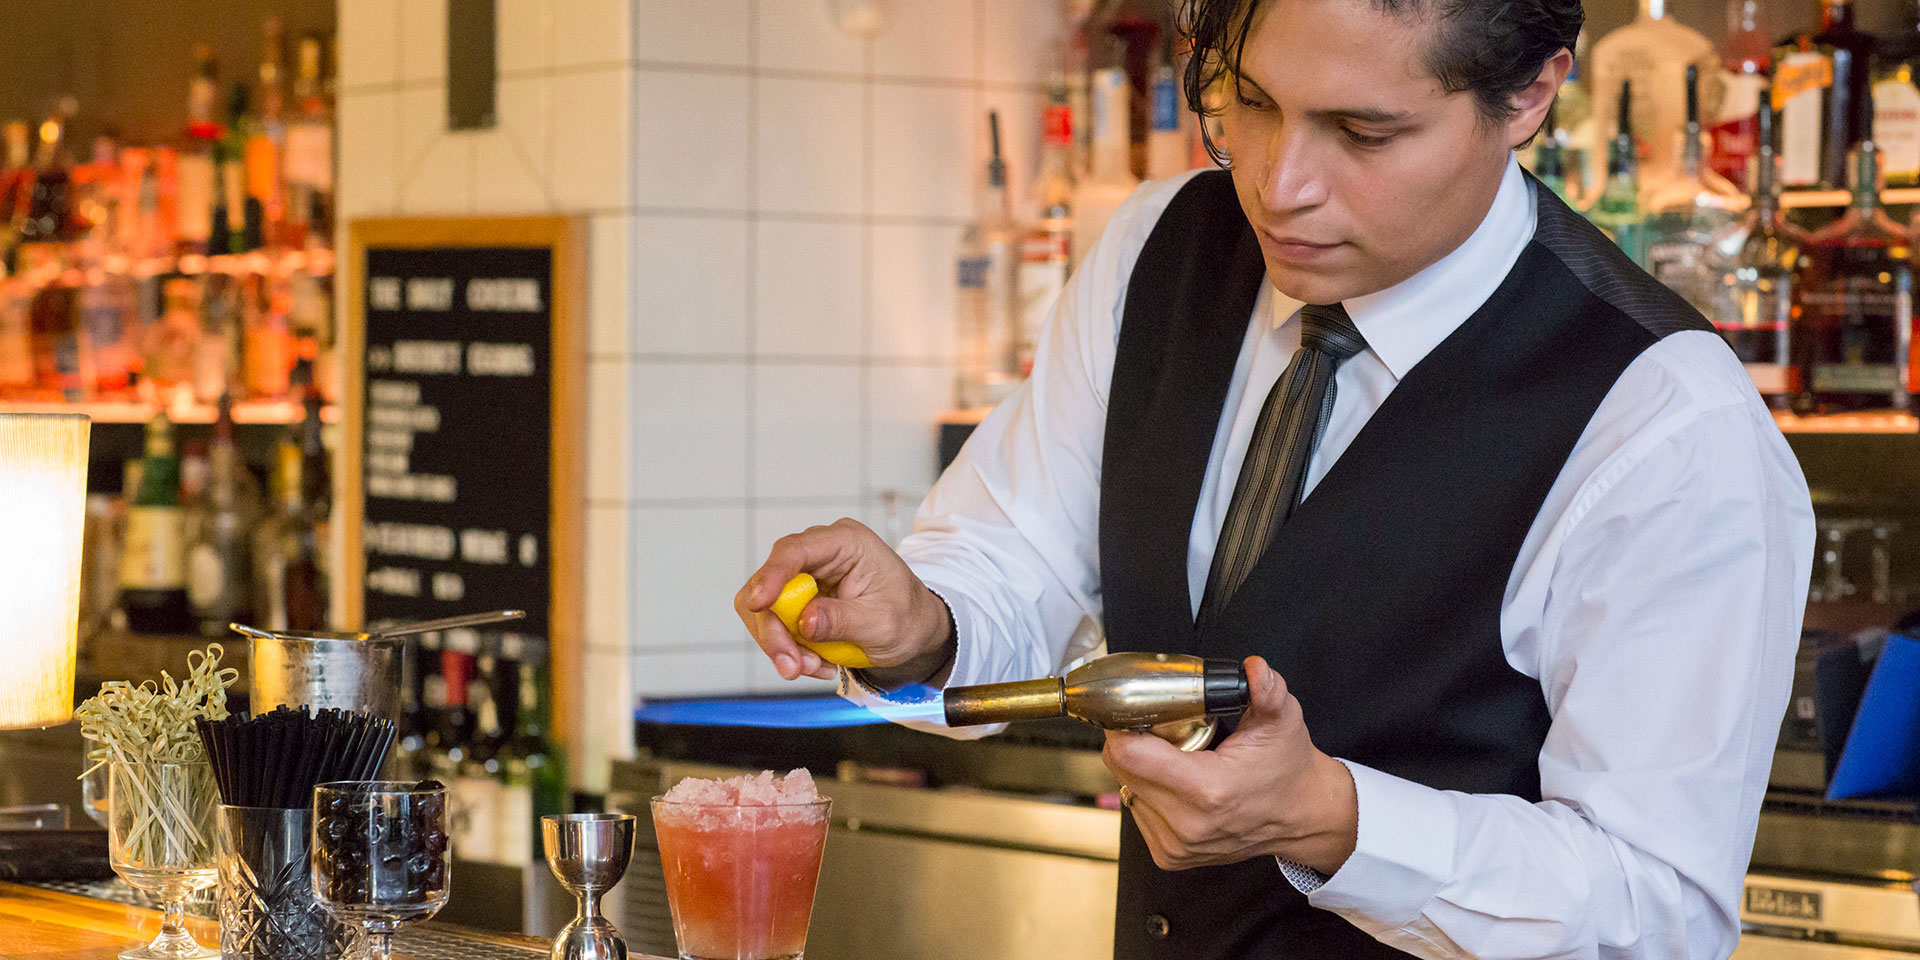 L.A.’s Tony Gonzales Mixes Up Cocktails with an Unexpected Twist at DISTRICT